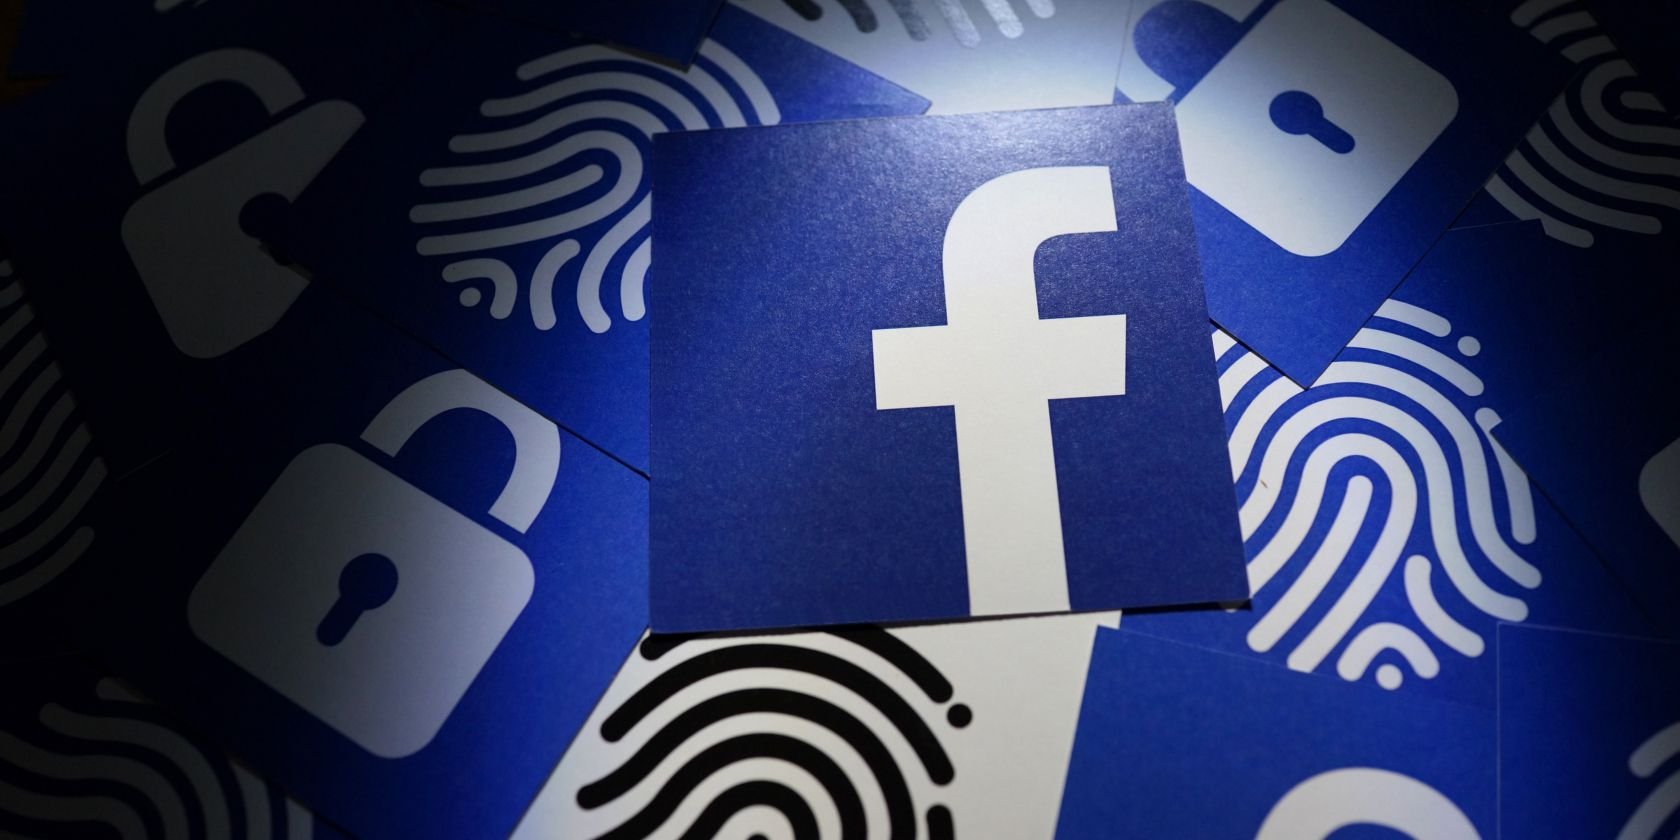 The Ultimate Facebook Privacy and Security Checklist